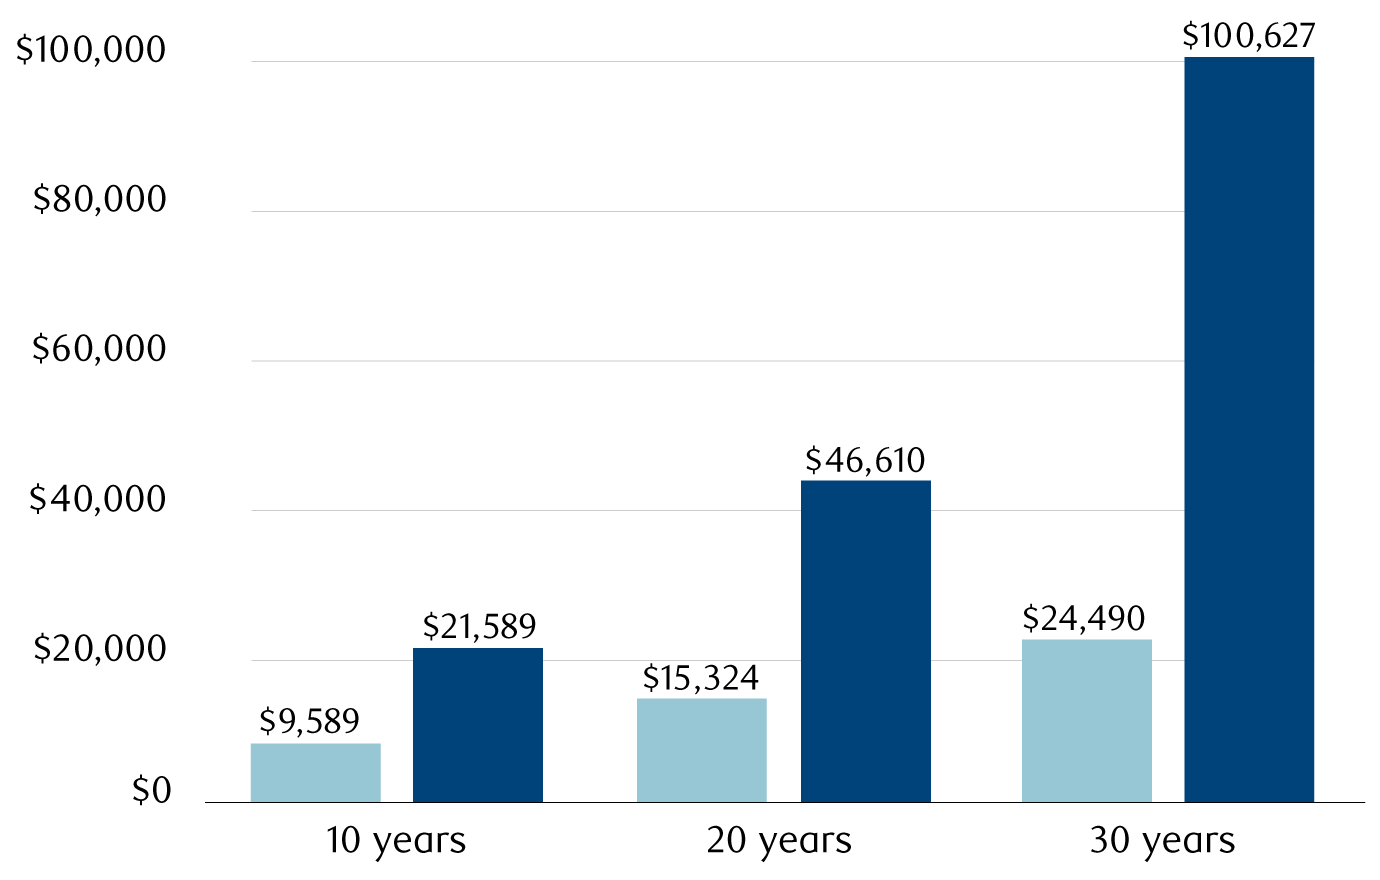 The bar chart shows the differences between investing $10,000 inside an RRSP and $10,000 outside an RRSP